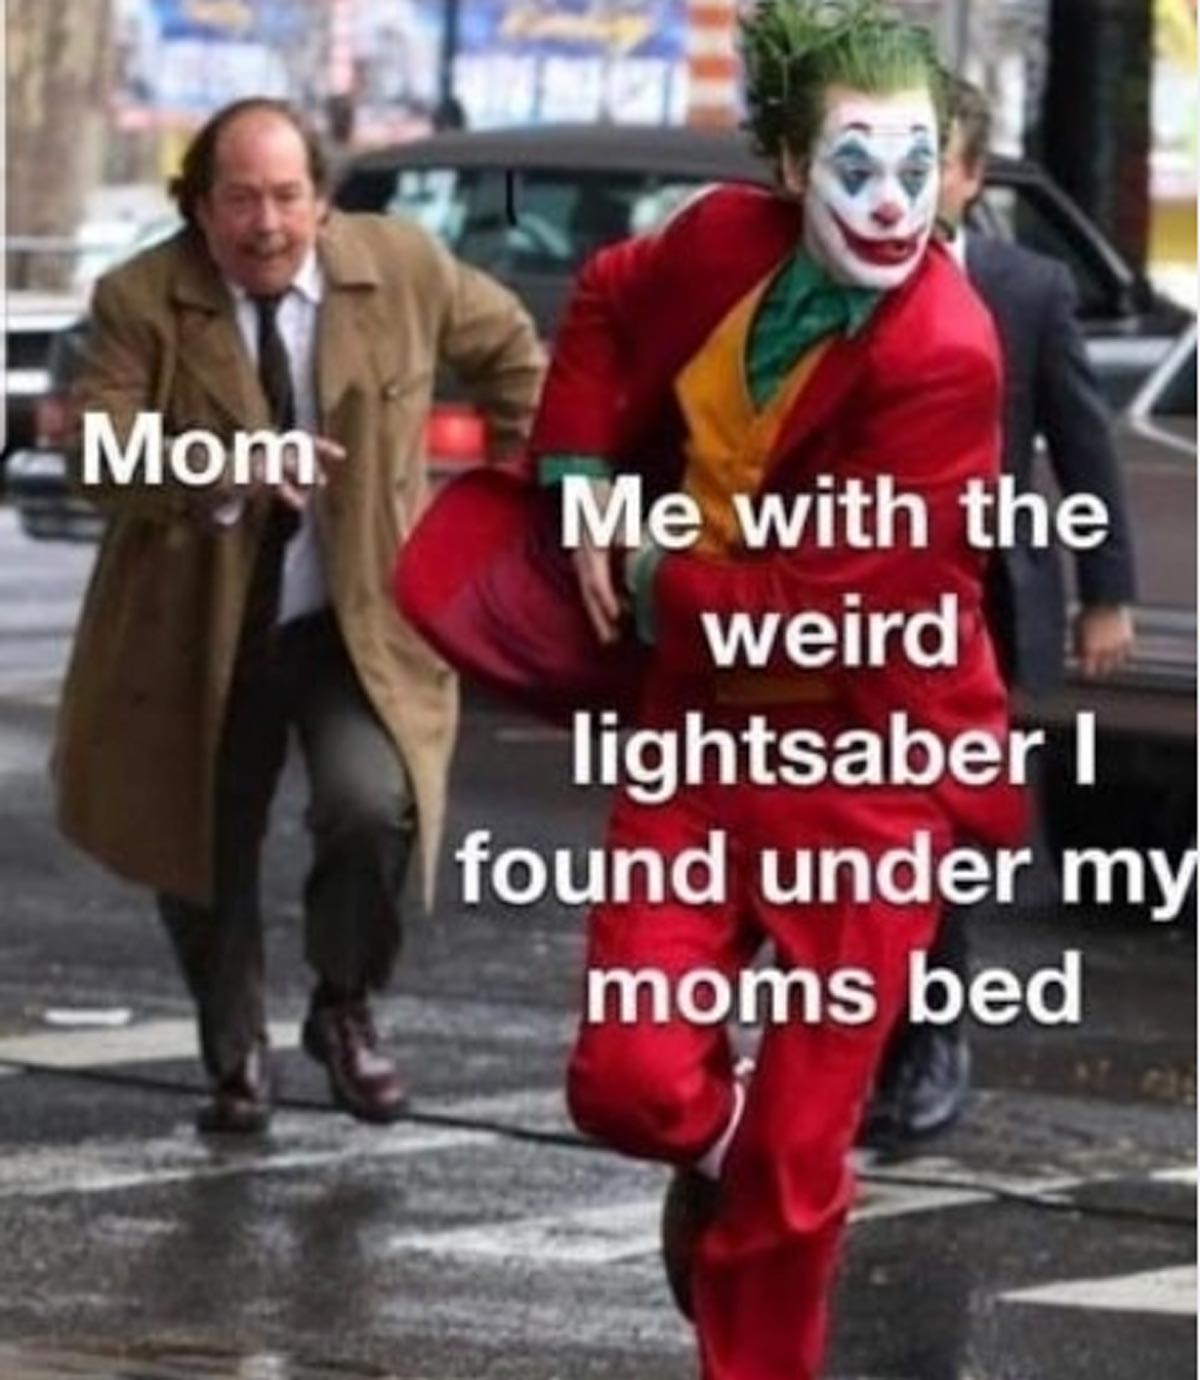 funny sex memes - weird lightsaber - Mom Me with the weird lightsaber found under my moms bed